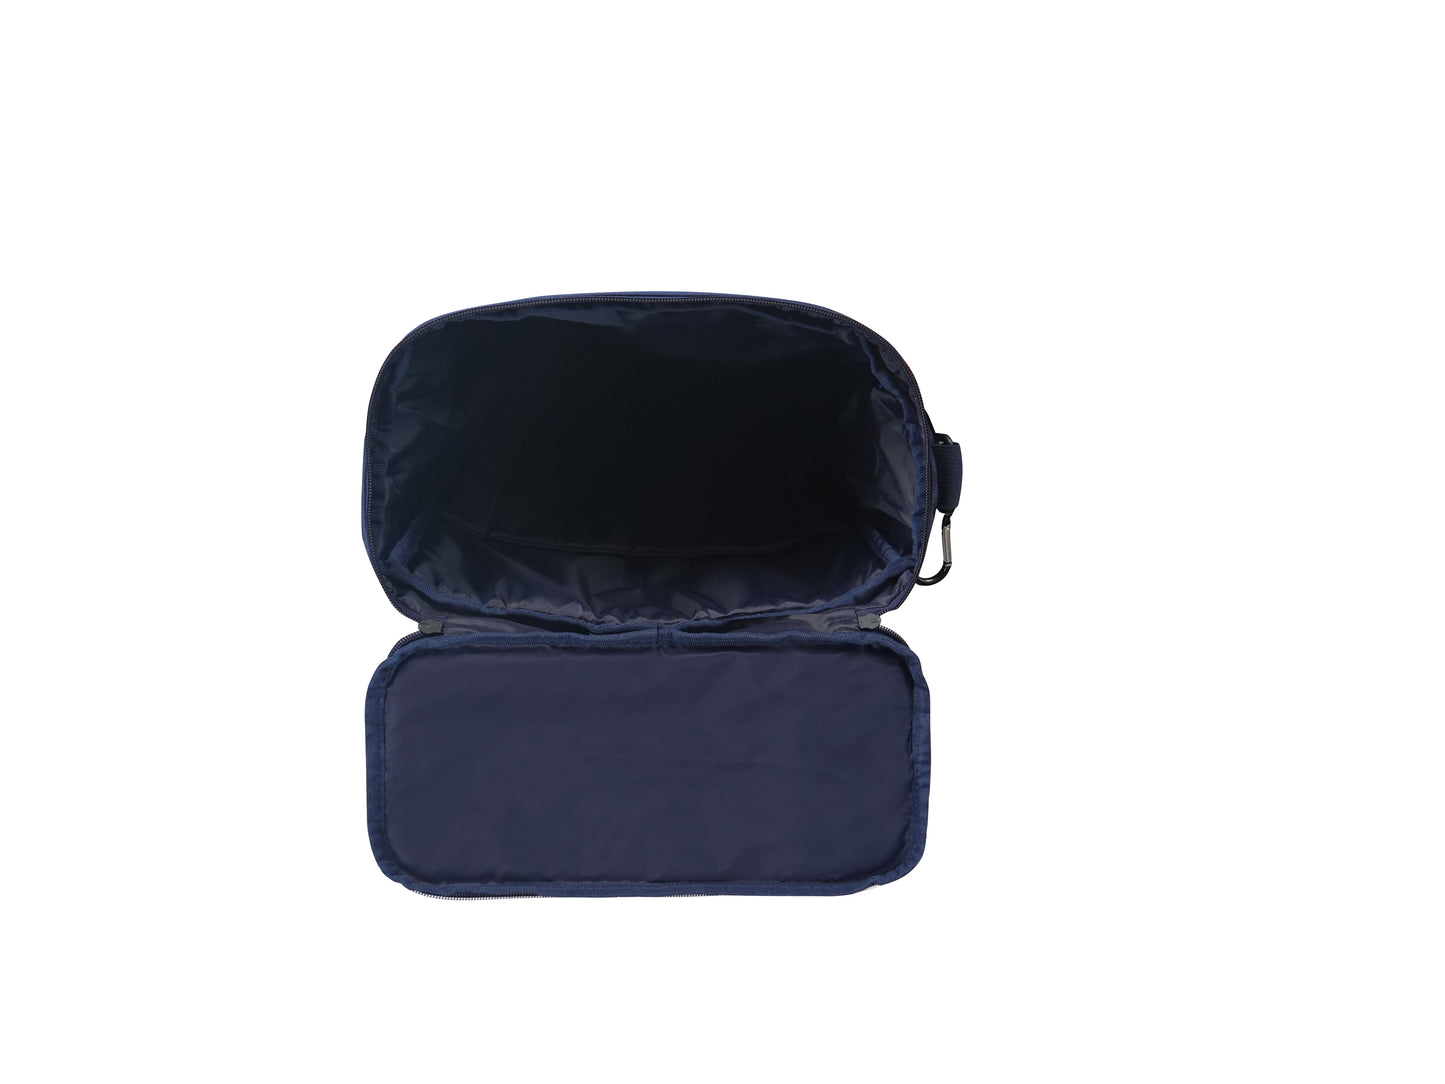 Cambridge South HC - Accra Backpack - Navy